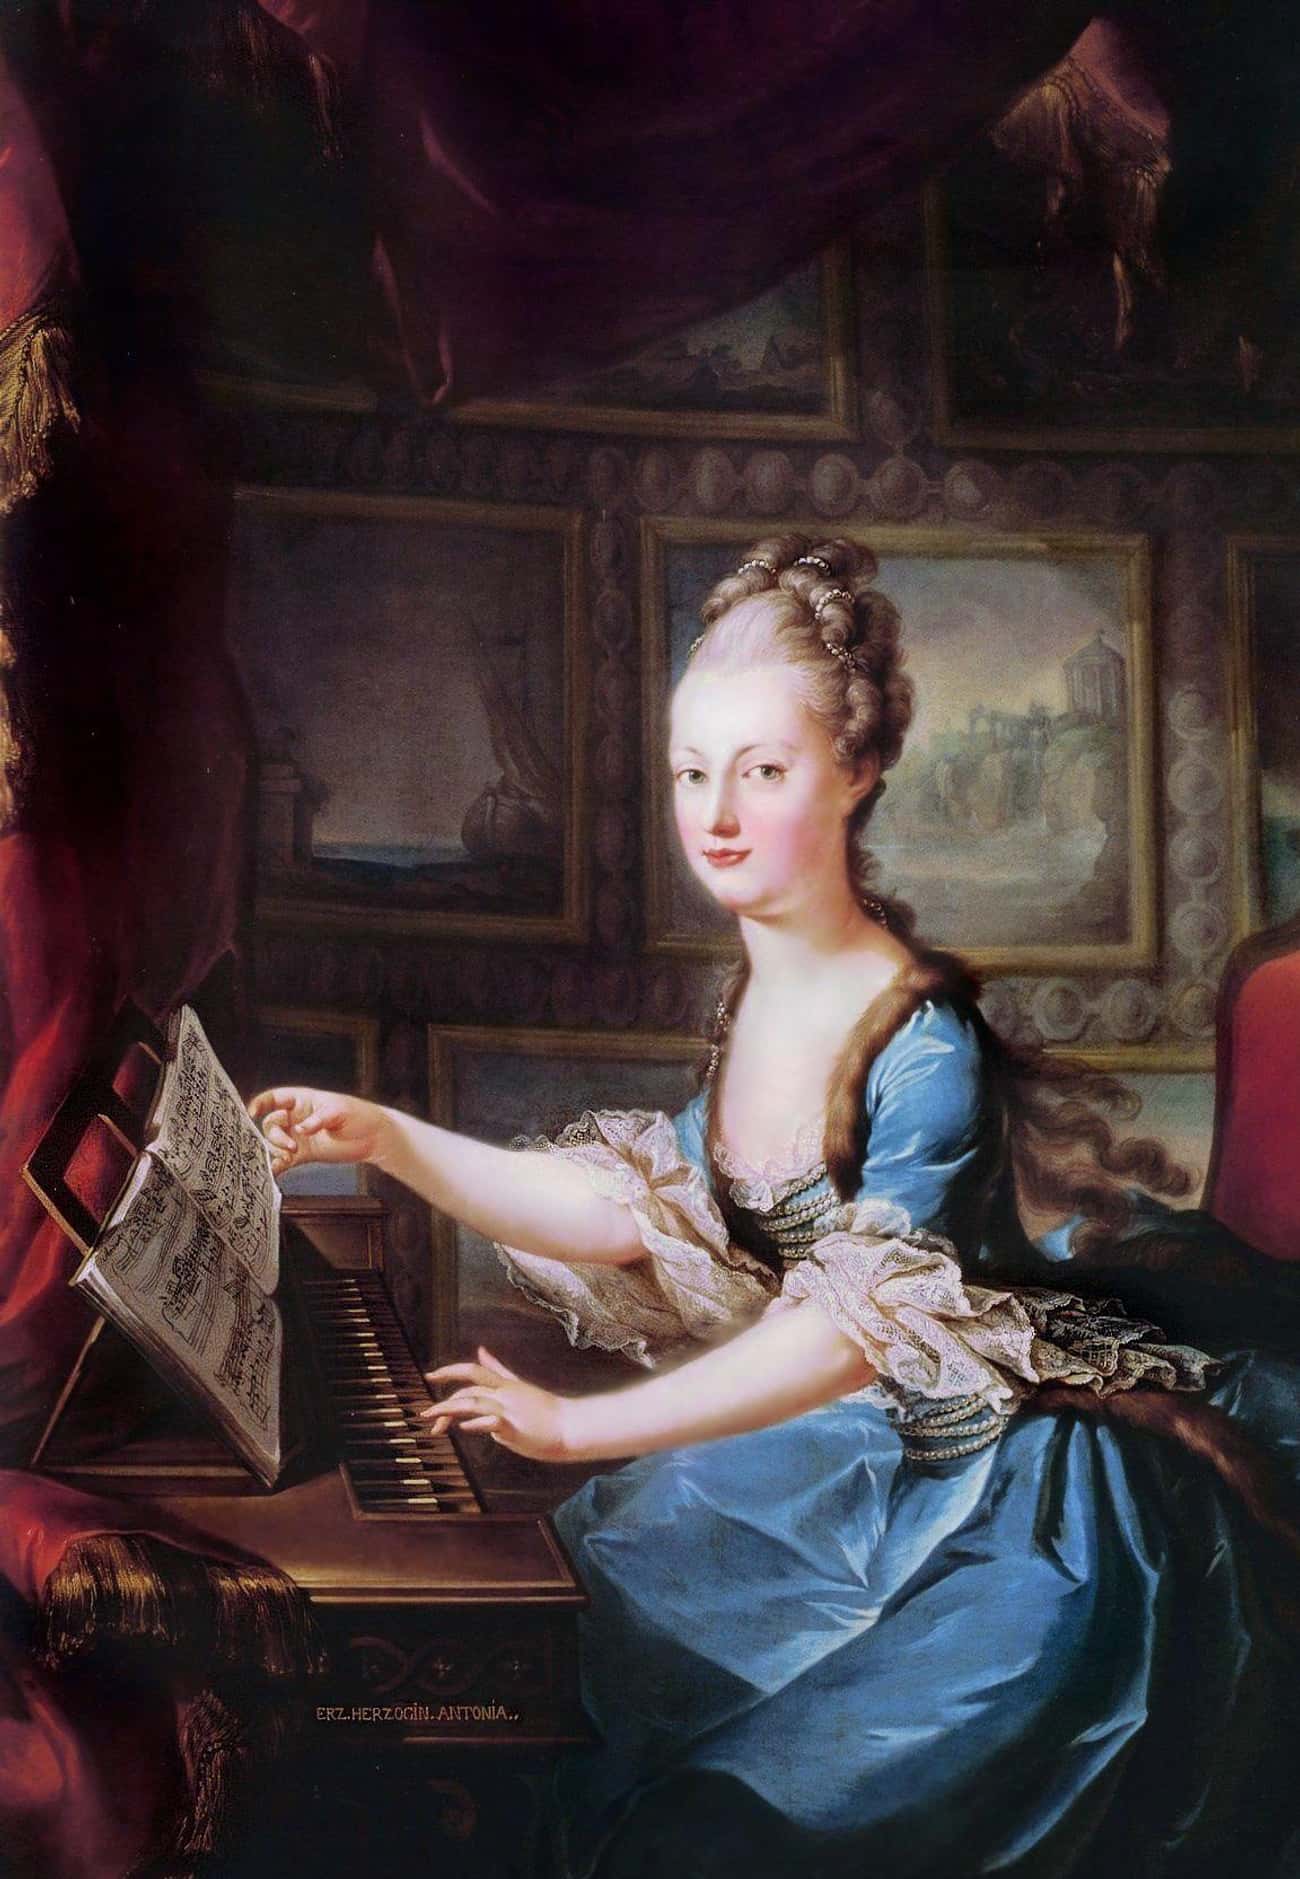 When She Was A Child, She Met Mozart